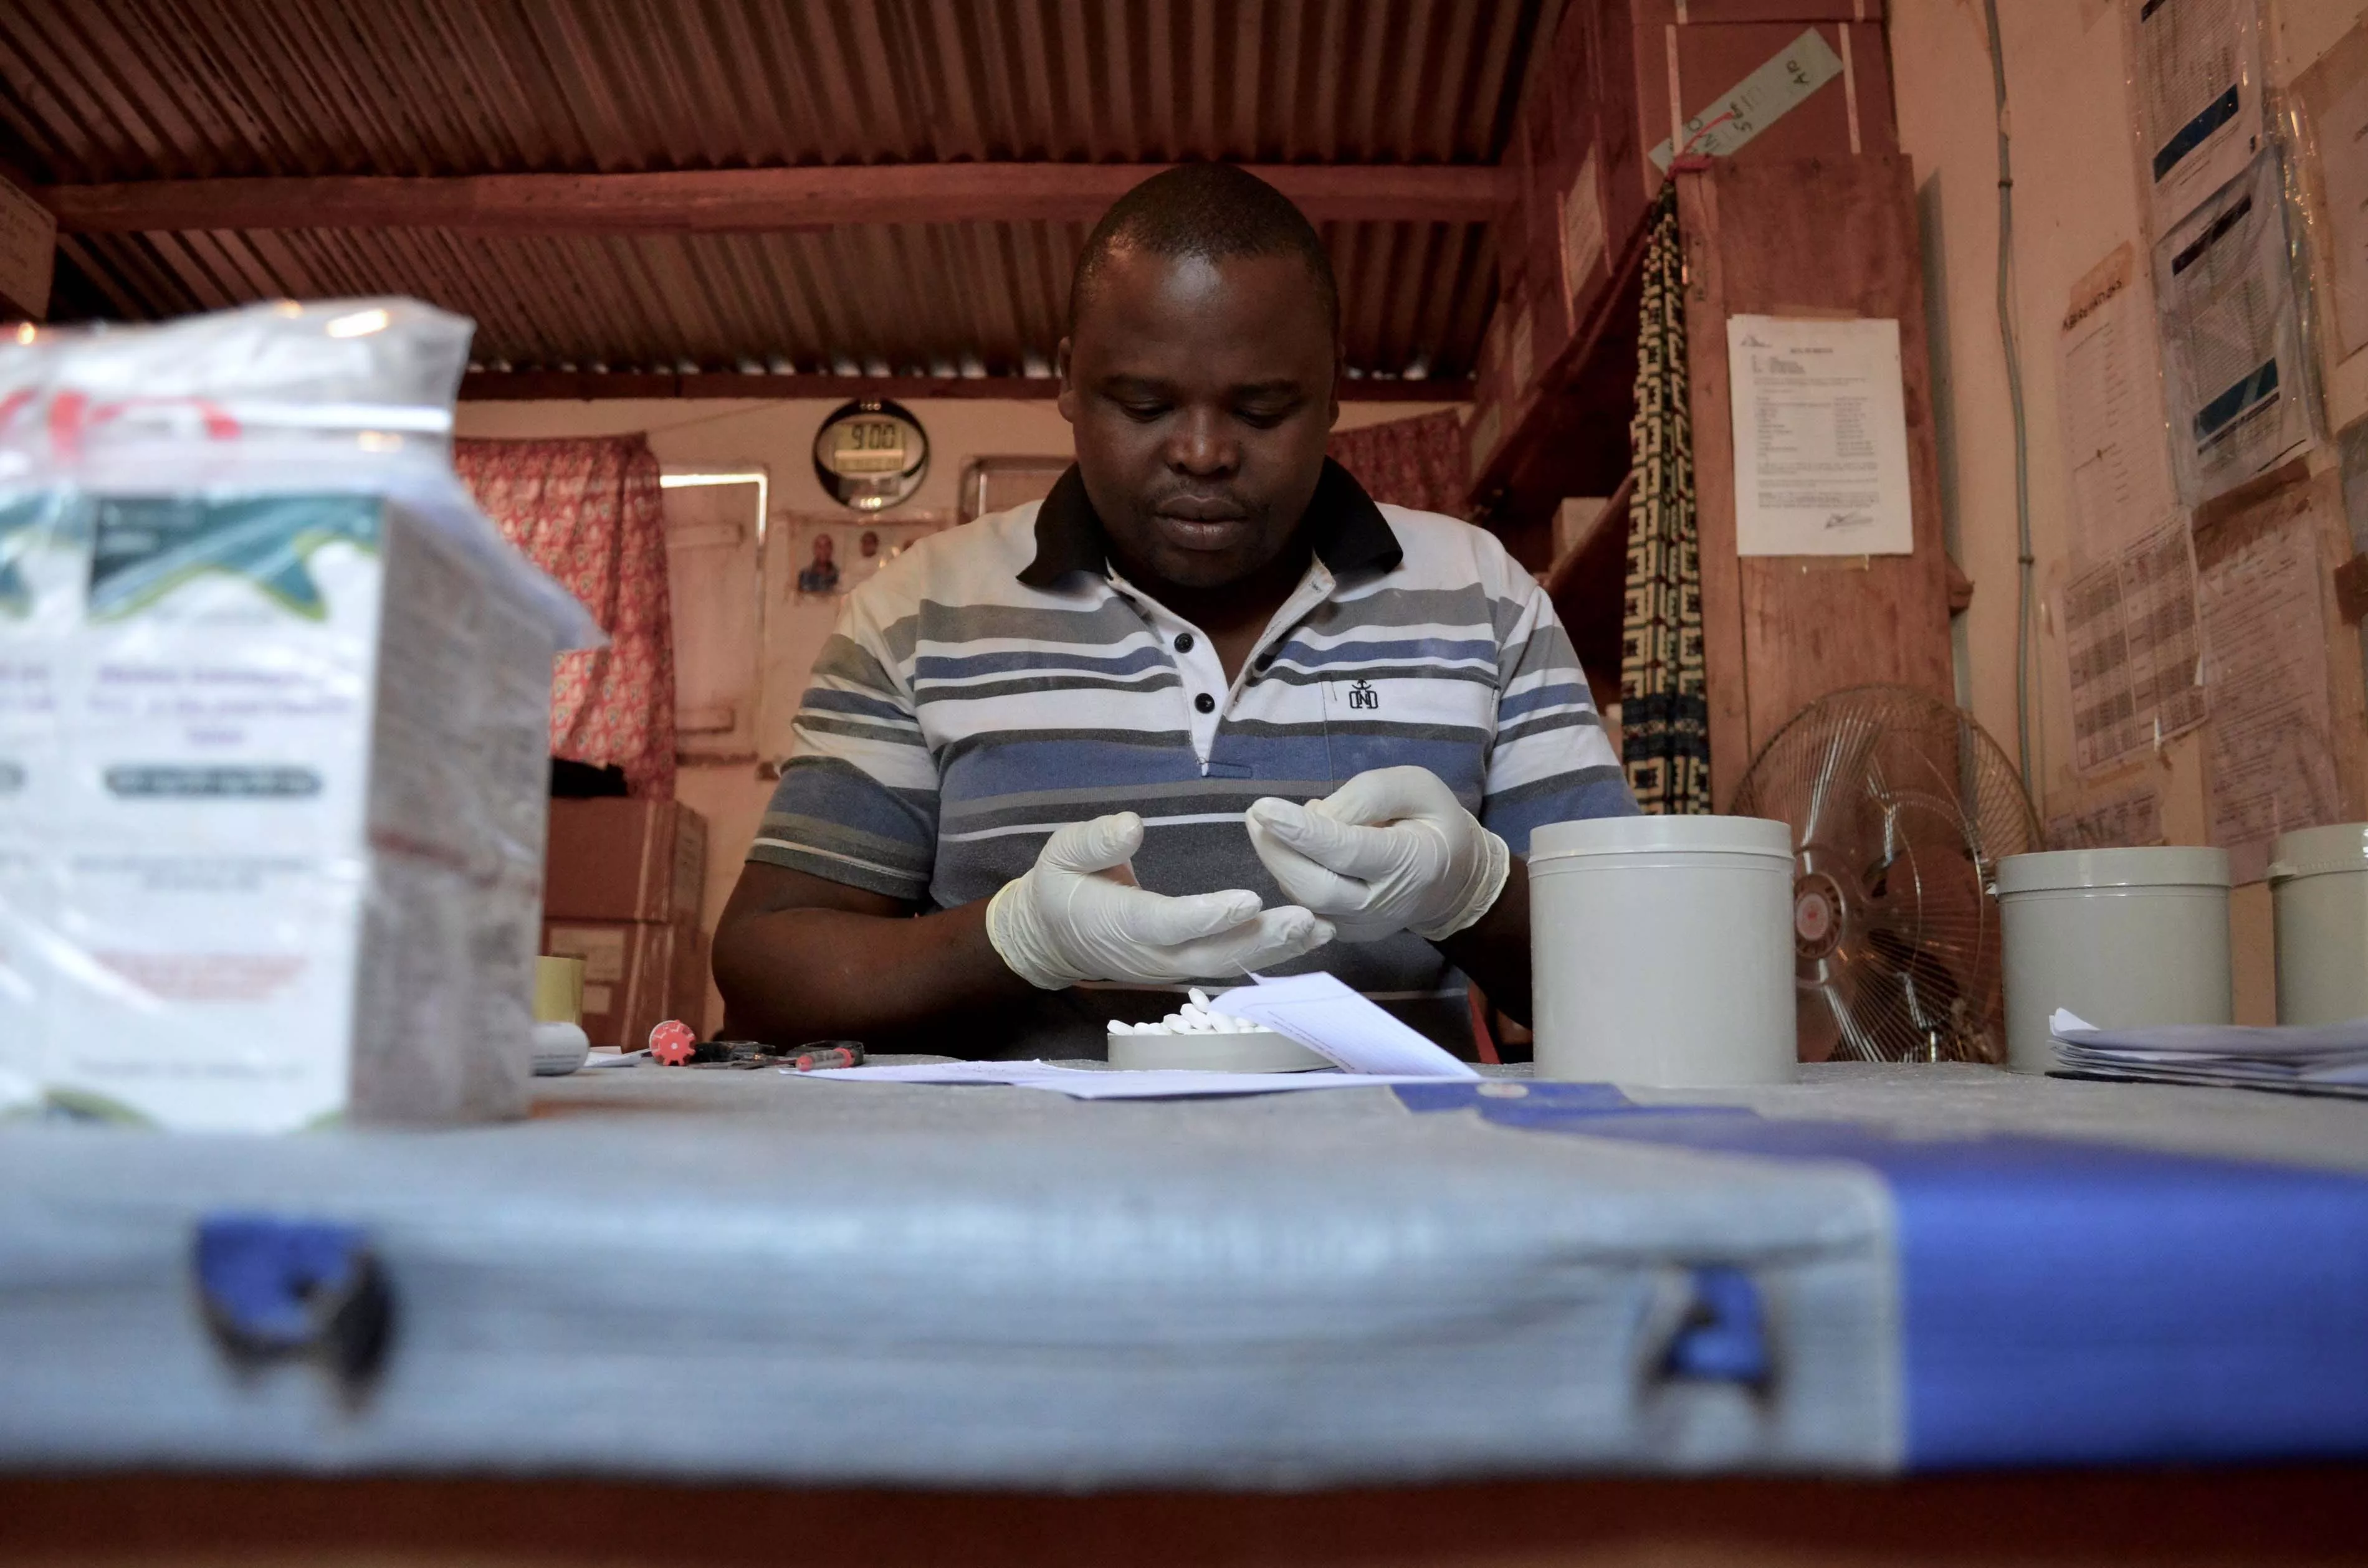 The pharmacist in Zémio, Alain, prepares Raymond’s order: ninety days’ worth of HIV medications for the 26 people in his CAG group. December 2016.  Raymond was health worker in MSF supported health center of Djema, in the south east of Central African Republic (CAR). He was also a patient in the community based HIV program MSF launched in Zemio.